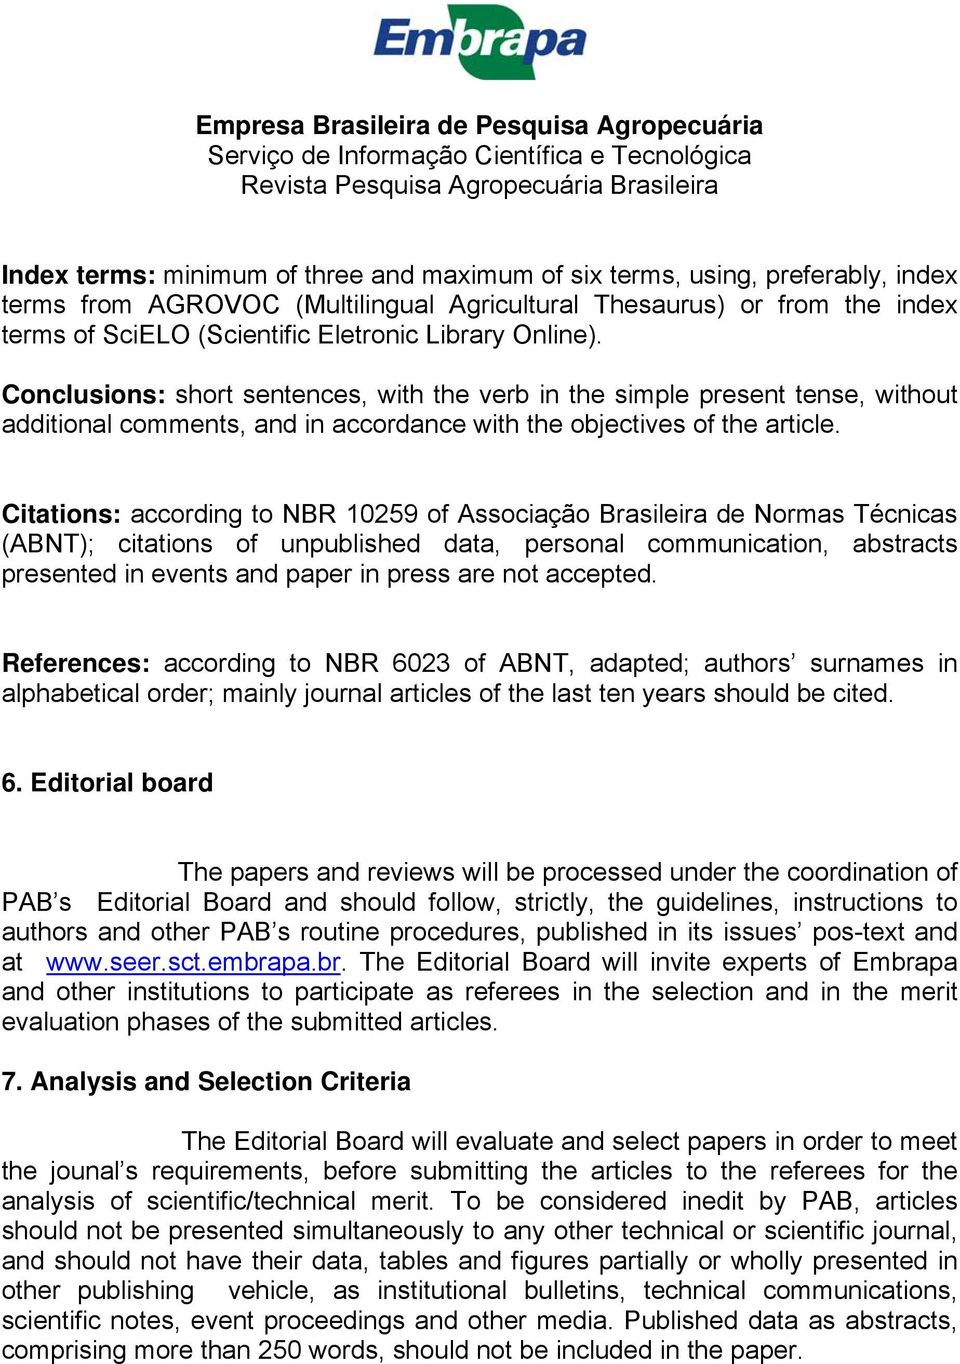 Citations: according to NBR 10259 of Associação Brasileira de Normas Técnicas (ABNT); citations of unpublished data, personal communication, abstracts presented in events and paper in press are not